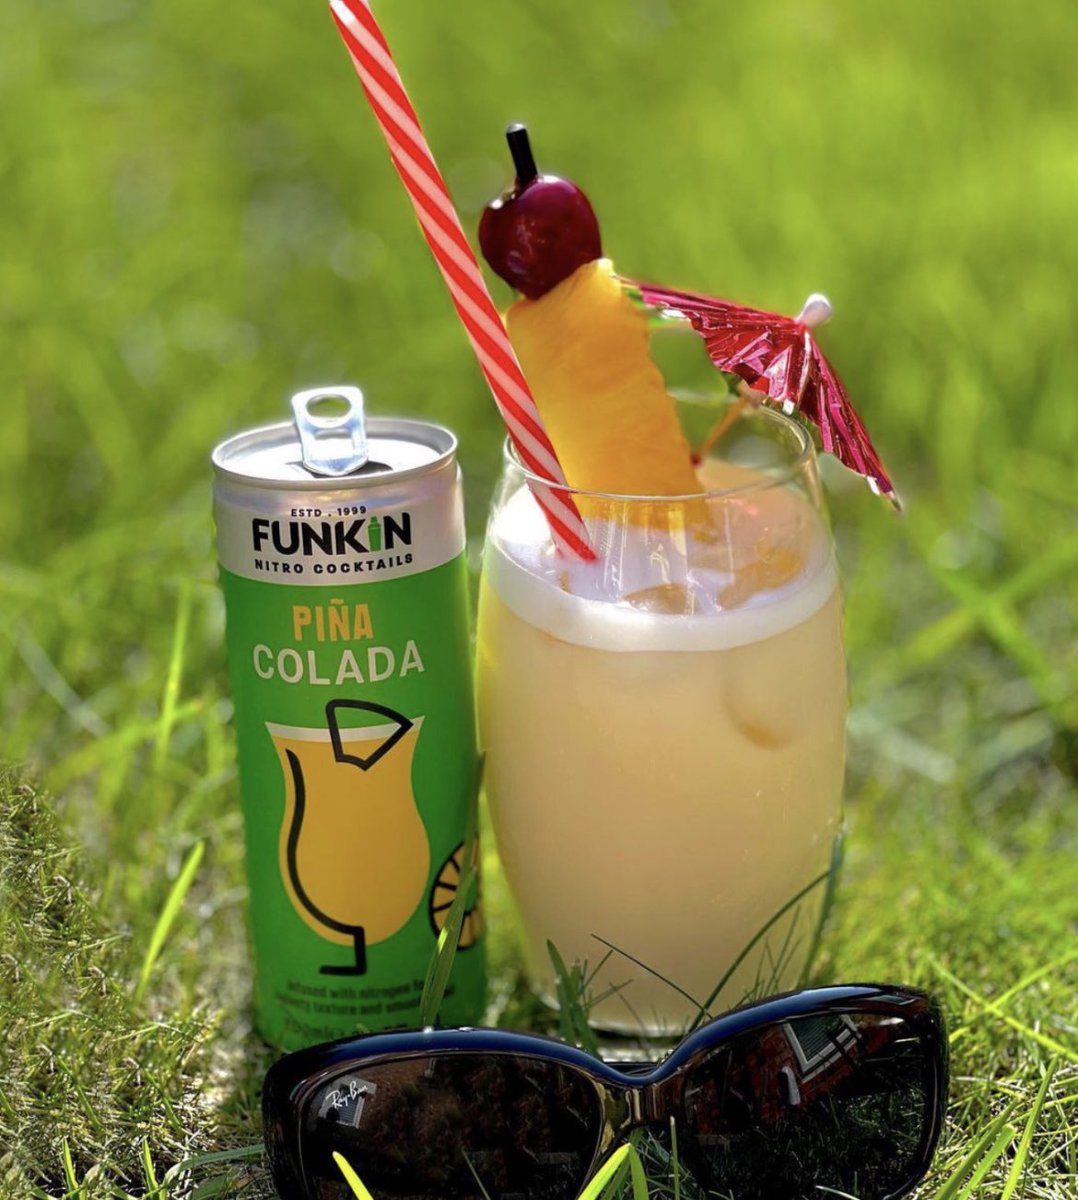 The weather may be struggling to make its mind up today but summer is definitely on its way 😎 What are you most excited for? 📸 @acannycuppa #humpday #summer #ItsFunkinTime